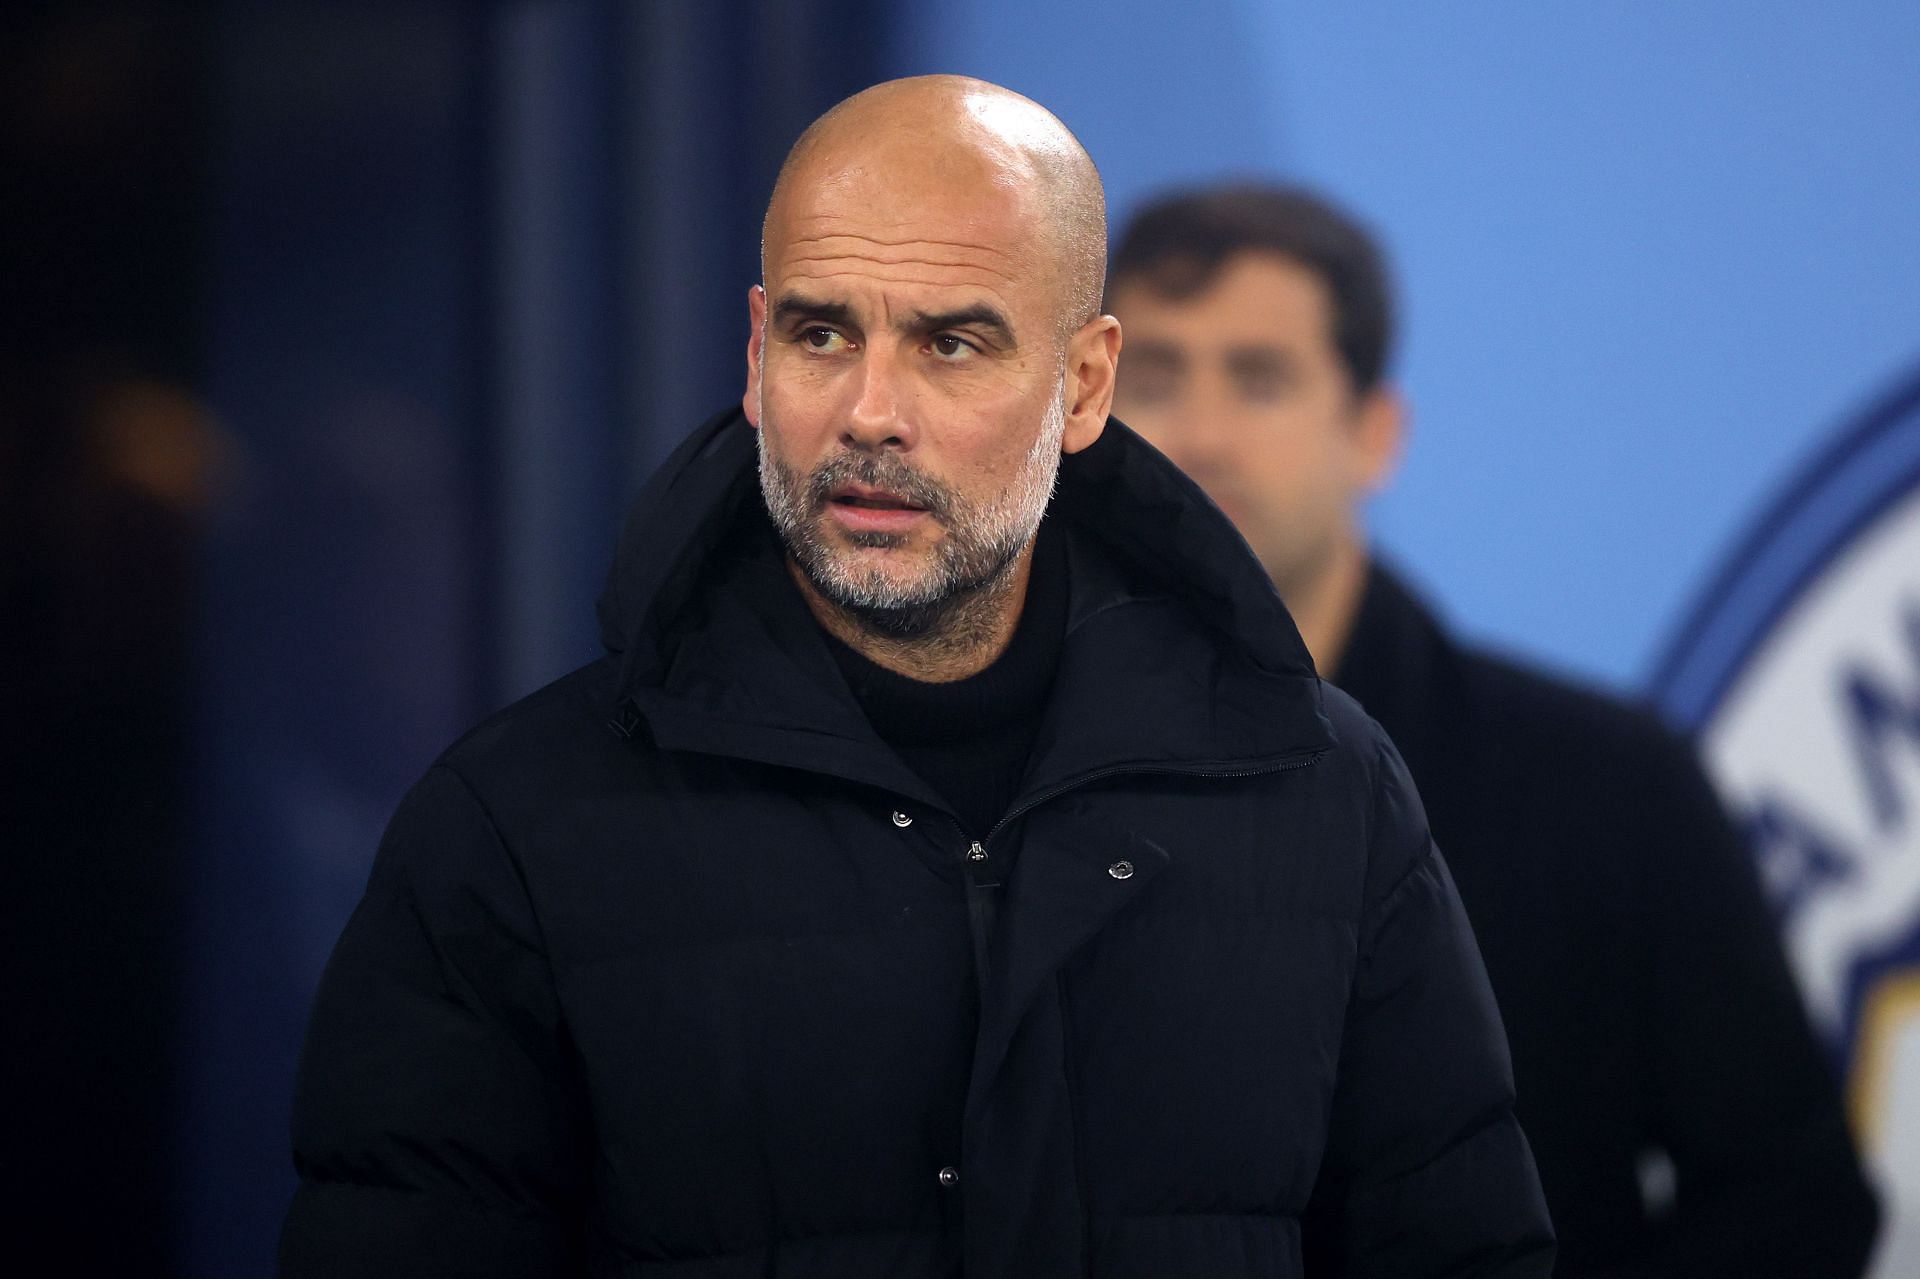 Manchester City manager Pep Guardiola looks on during an EFL Cup match